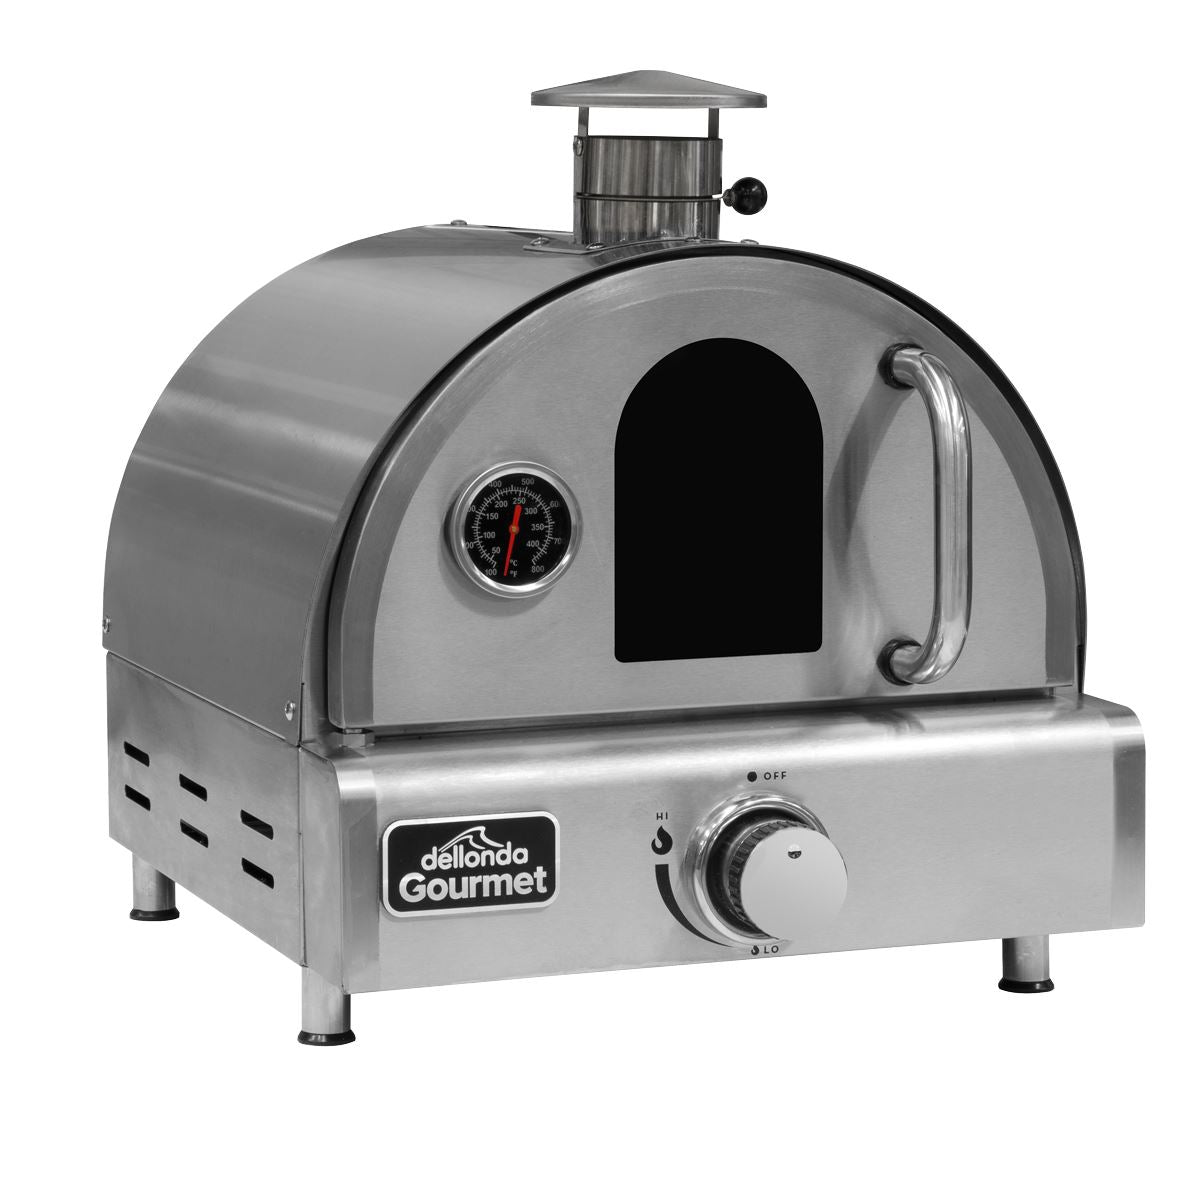 Dellonda Outdoor Tabletop Gas Powered Pizza Oven with Temperature Display - DG104